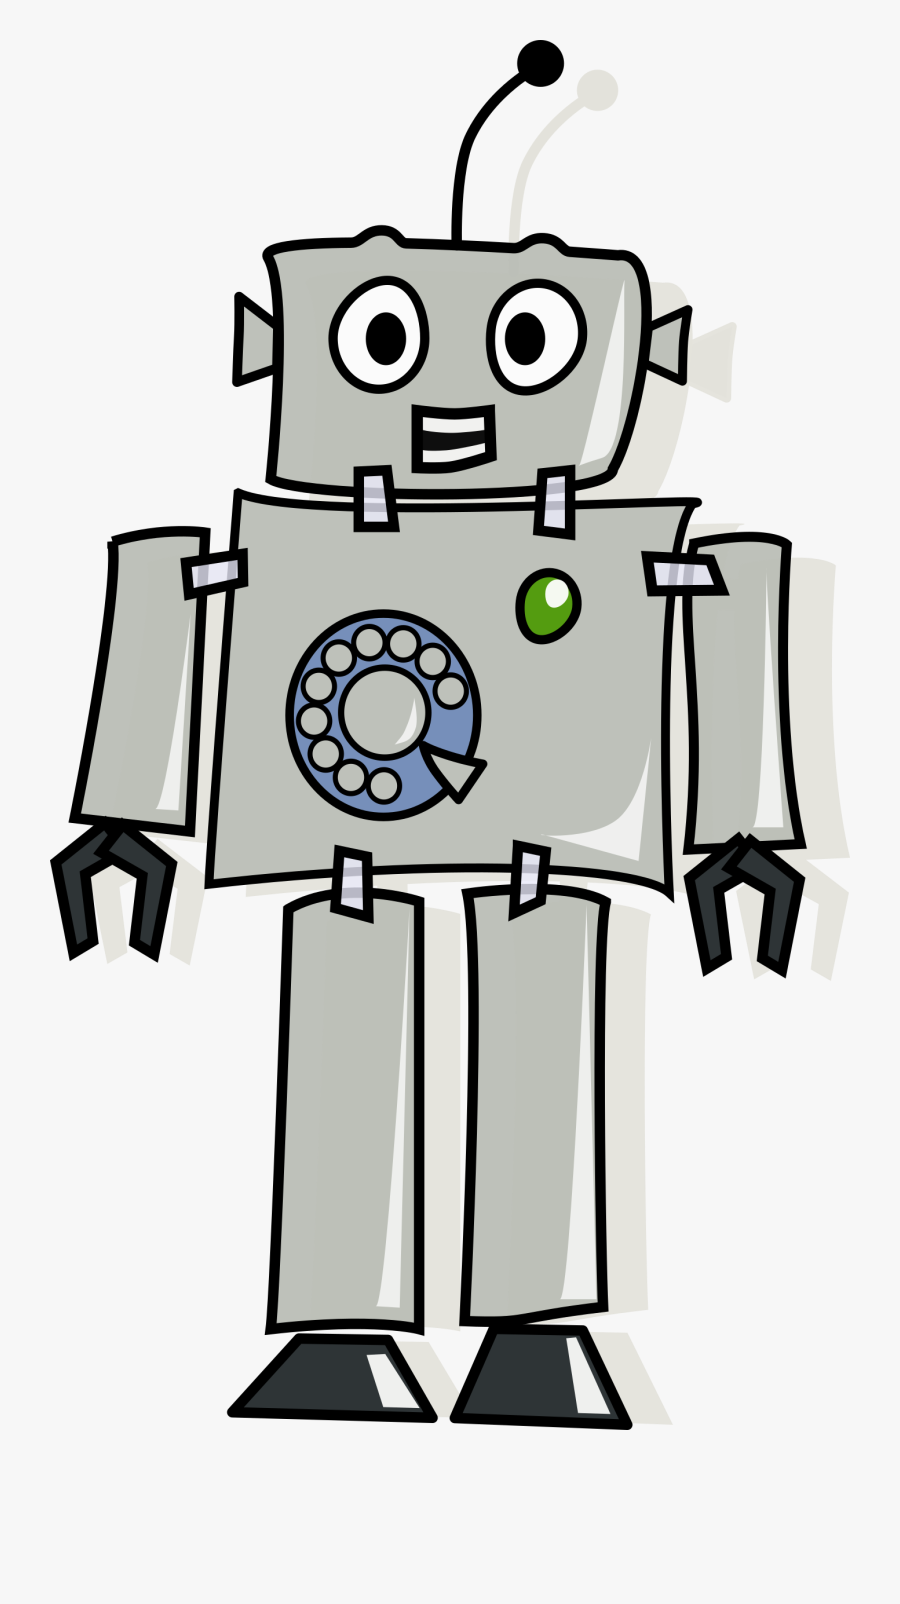 This Free Icons Png Design Of Answerphone Robot - Clip Art Robot, Transparent Clipart